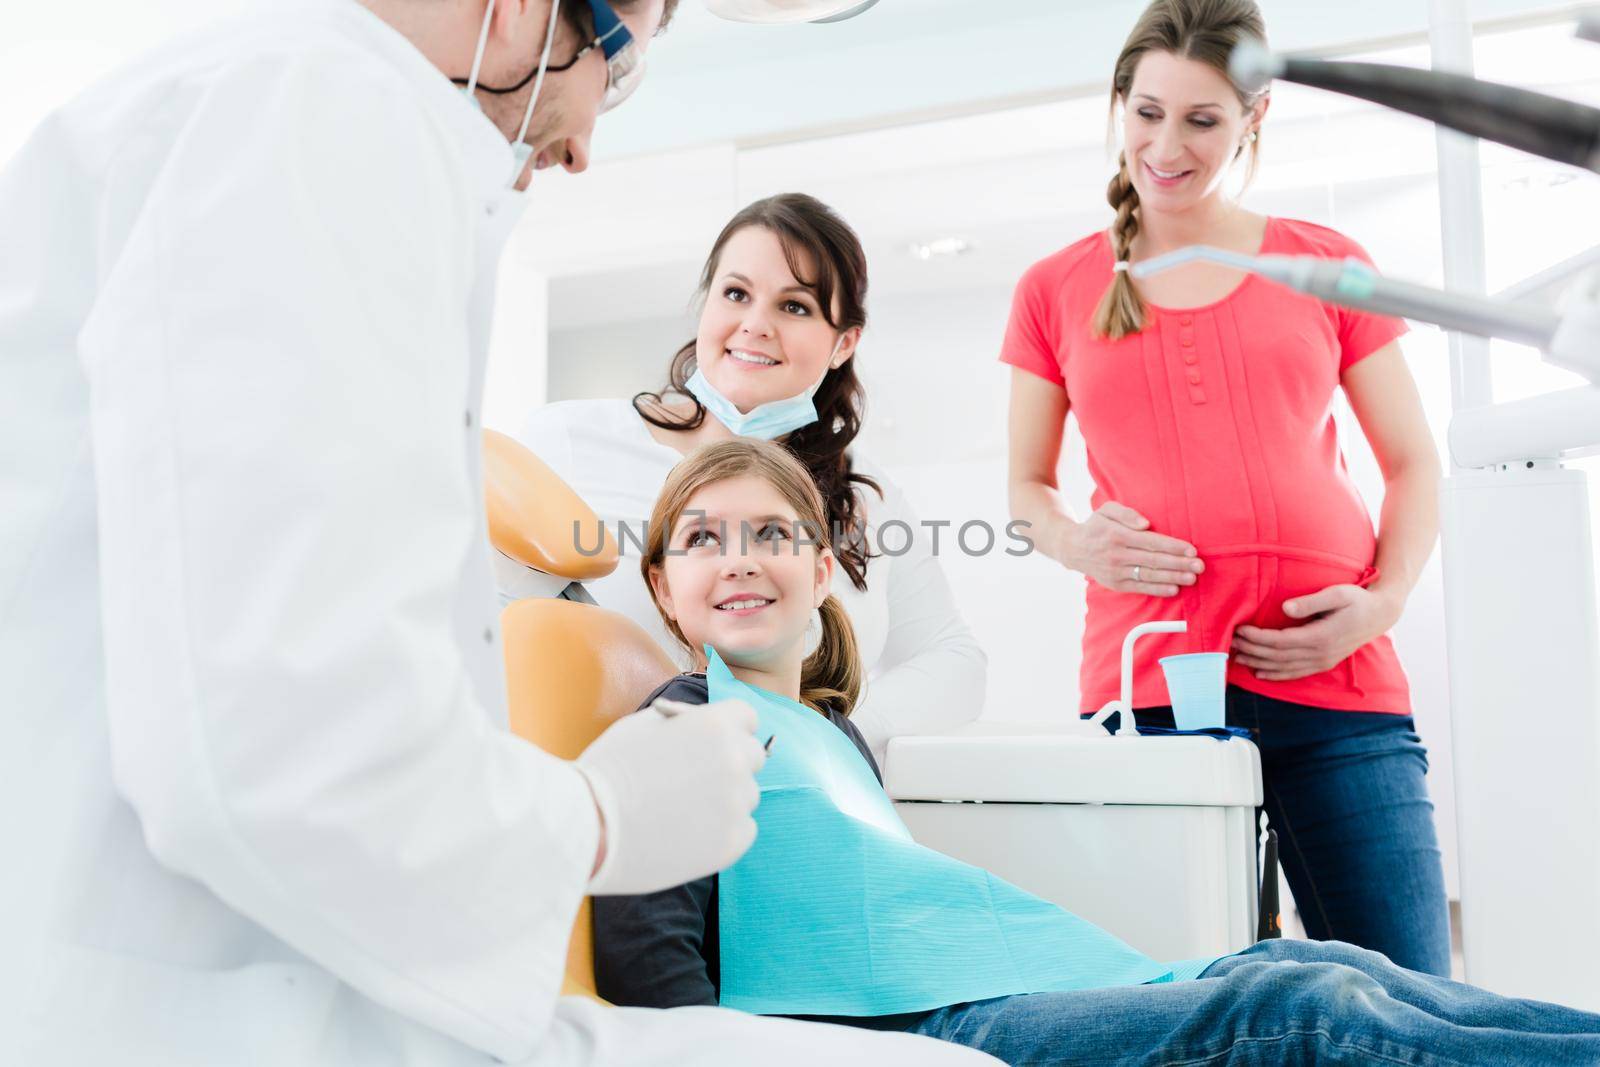 Dentist treating the whole family in his office by Kzenon